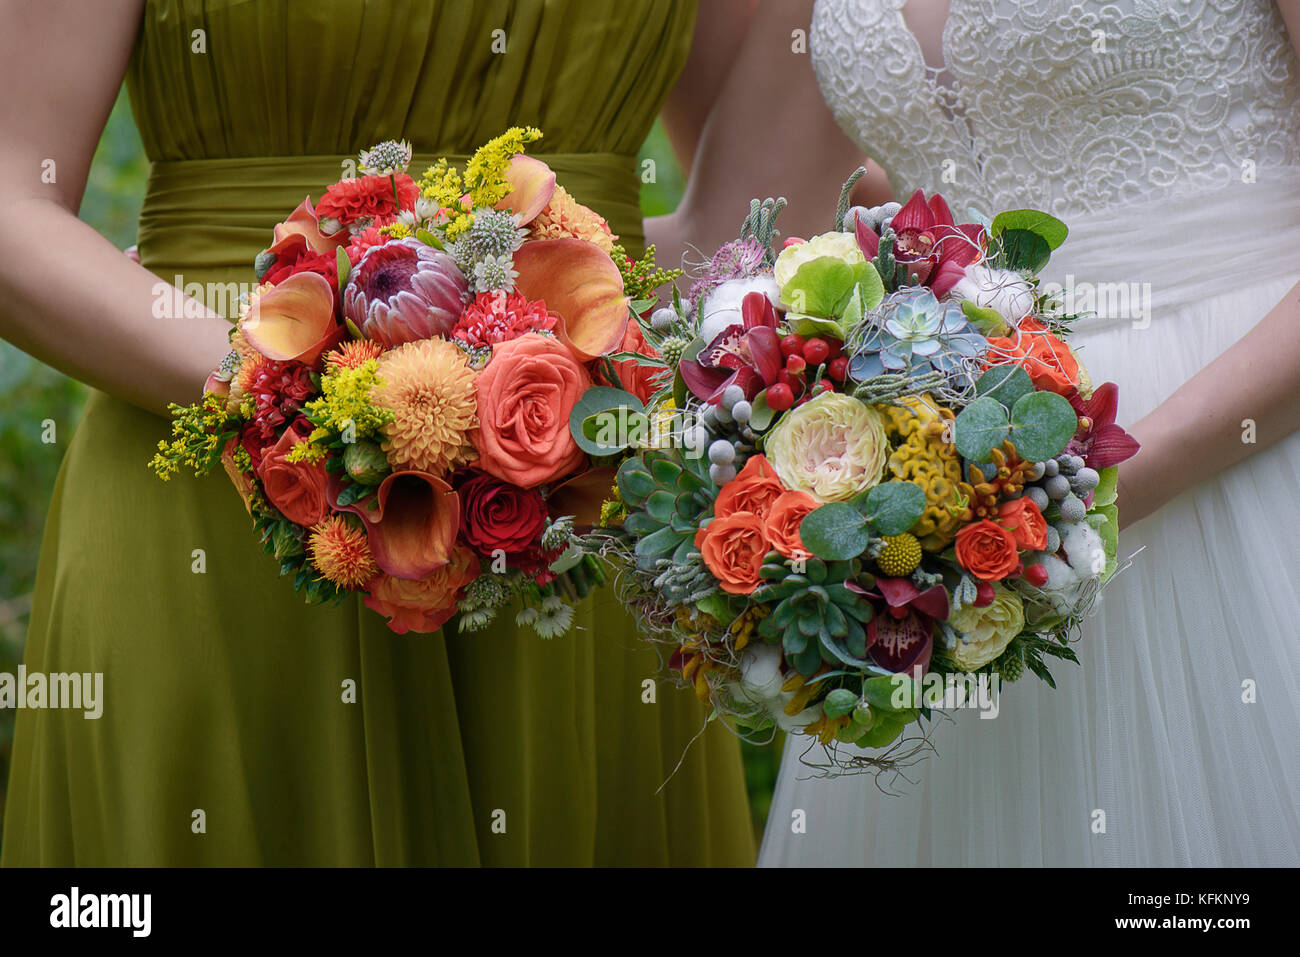 Close-up shot of bride and bridesmaid holding large colorful and sophisticated wedding bouquets Stock Photo